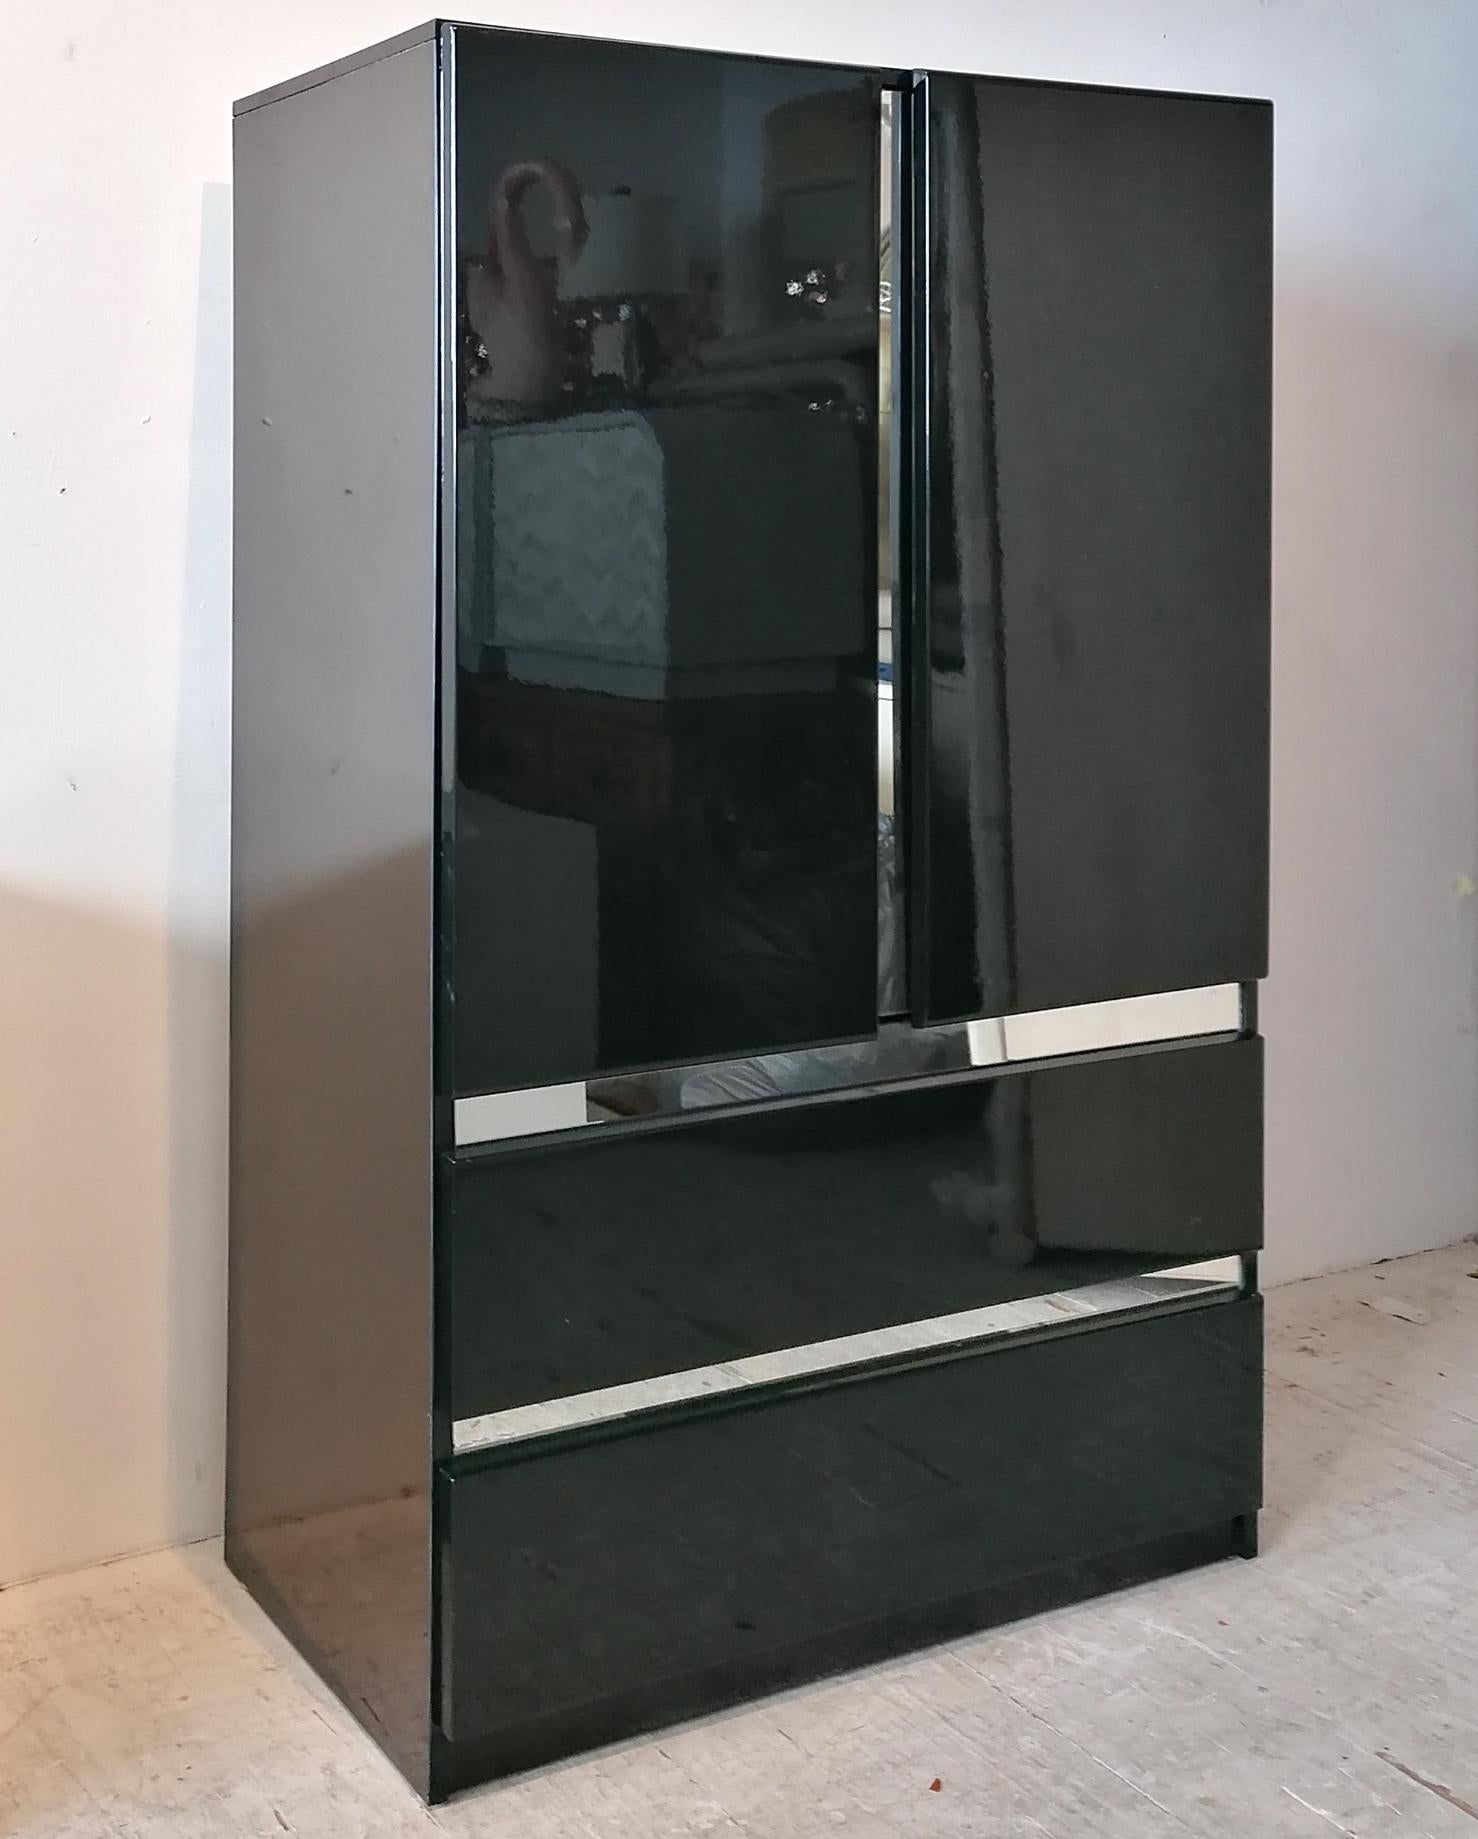 1980s deco revival black lacquer tall cabinet, by Millennium, USA. Looks like chrome edging, but is actually mirror glass. Double doors open onto shelved storage; 2 large drawers below. In great vintage condition.

We also have the matching